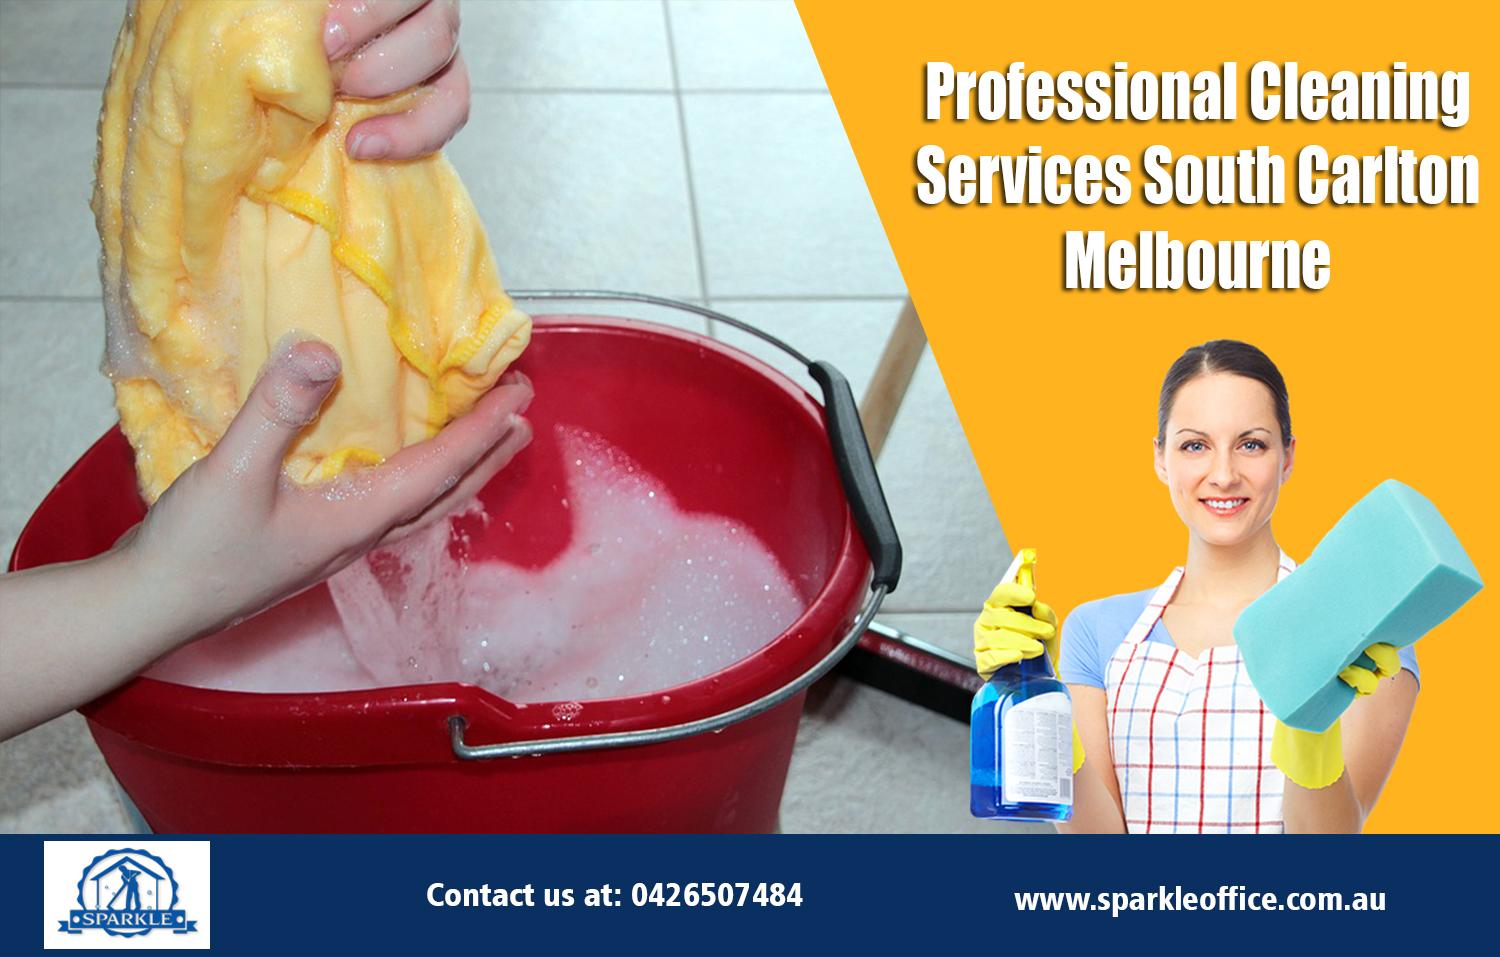 Professional Cleaning Services South Carlton Melbourne